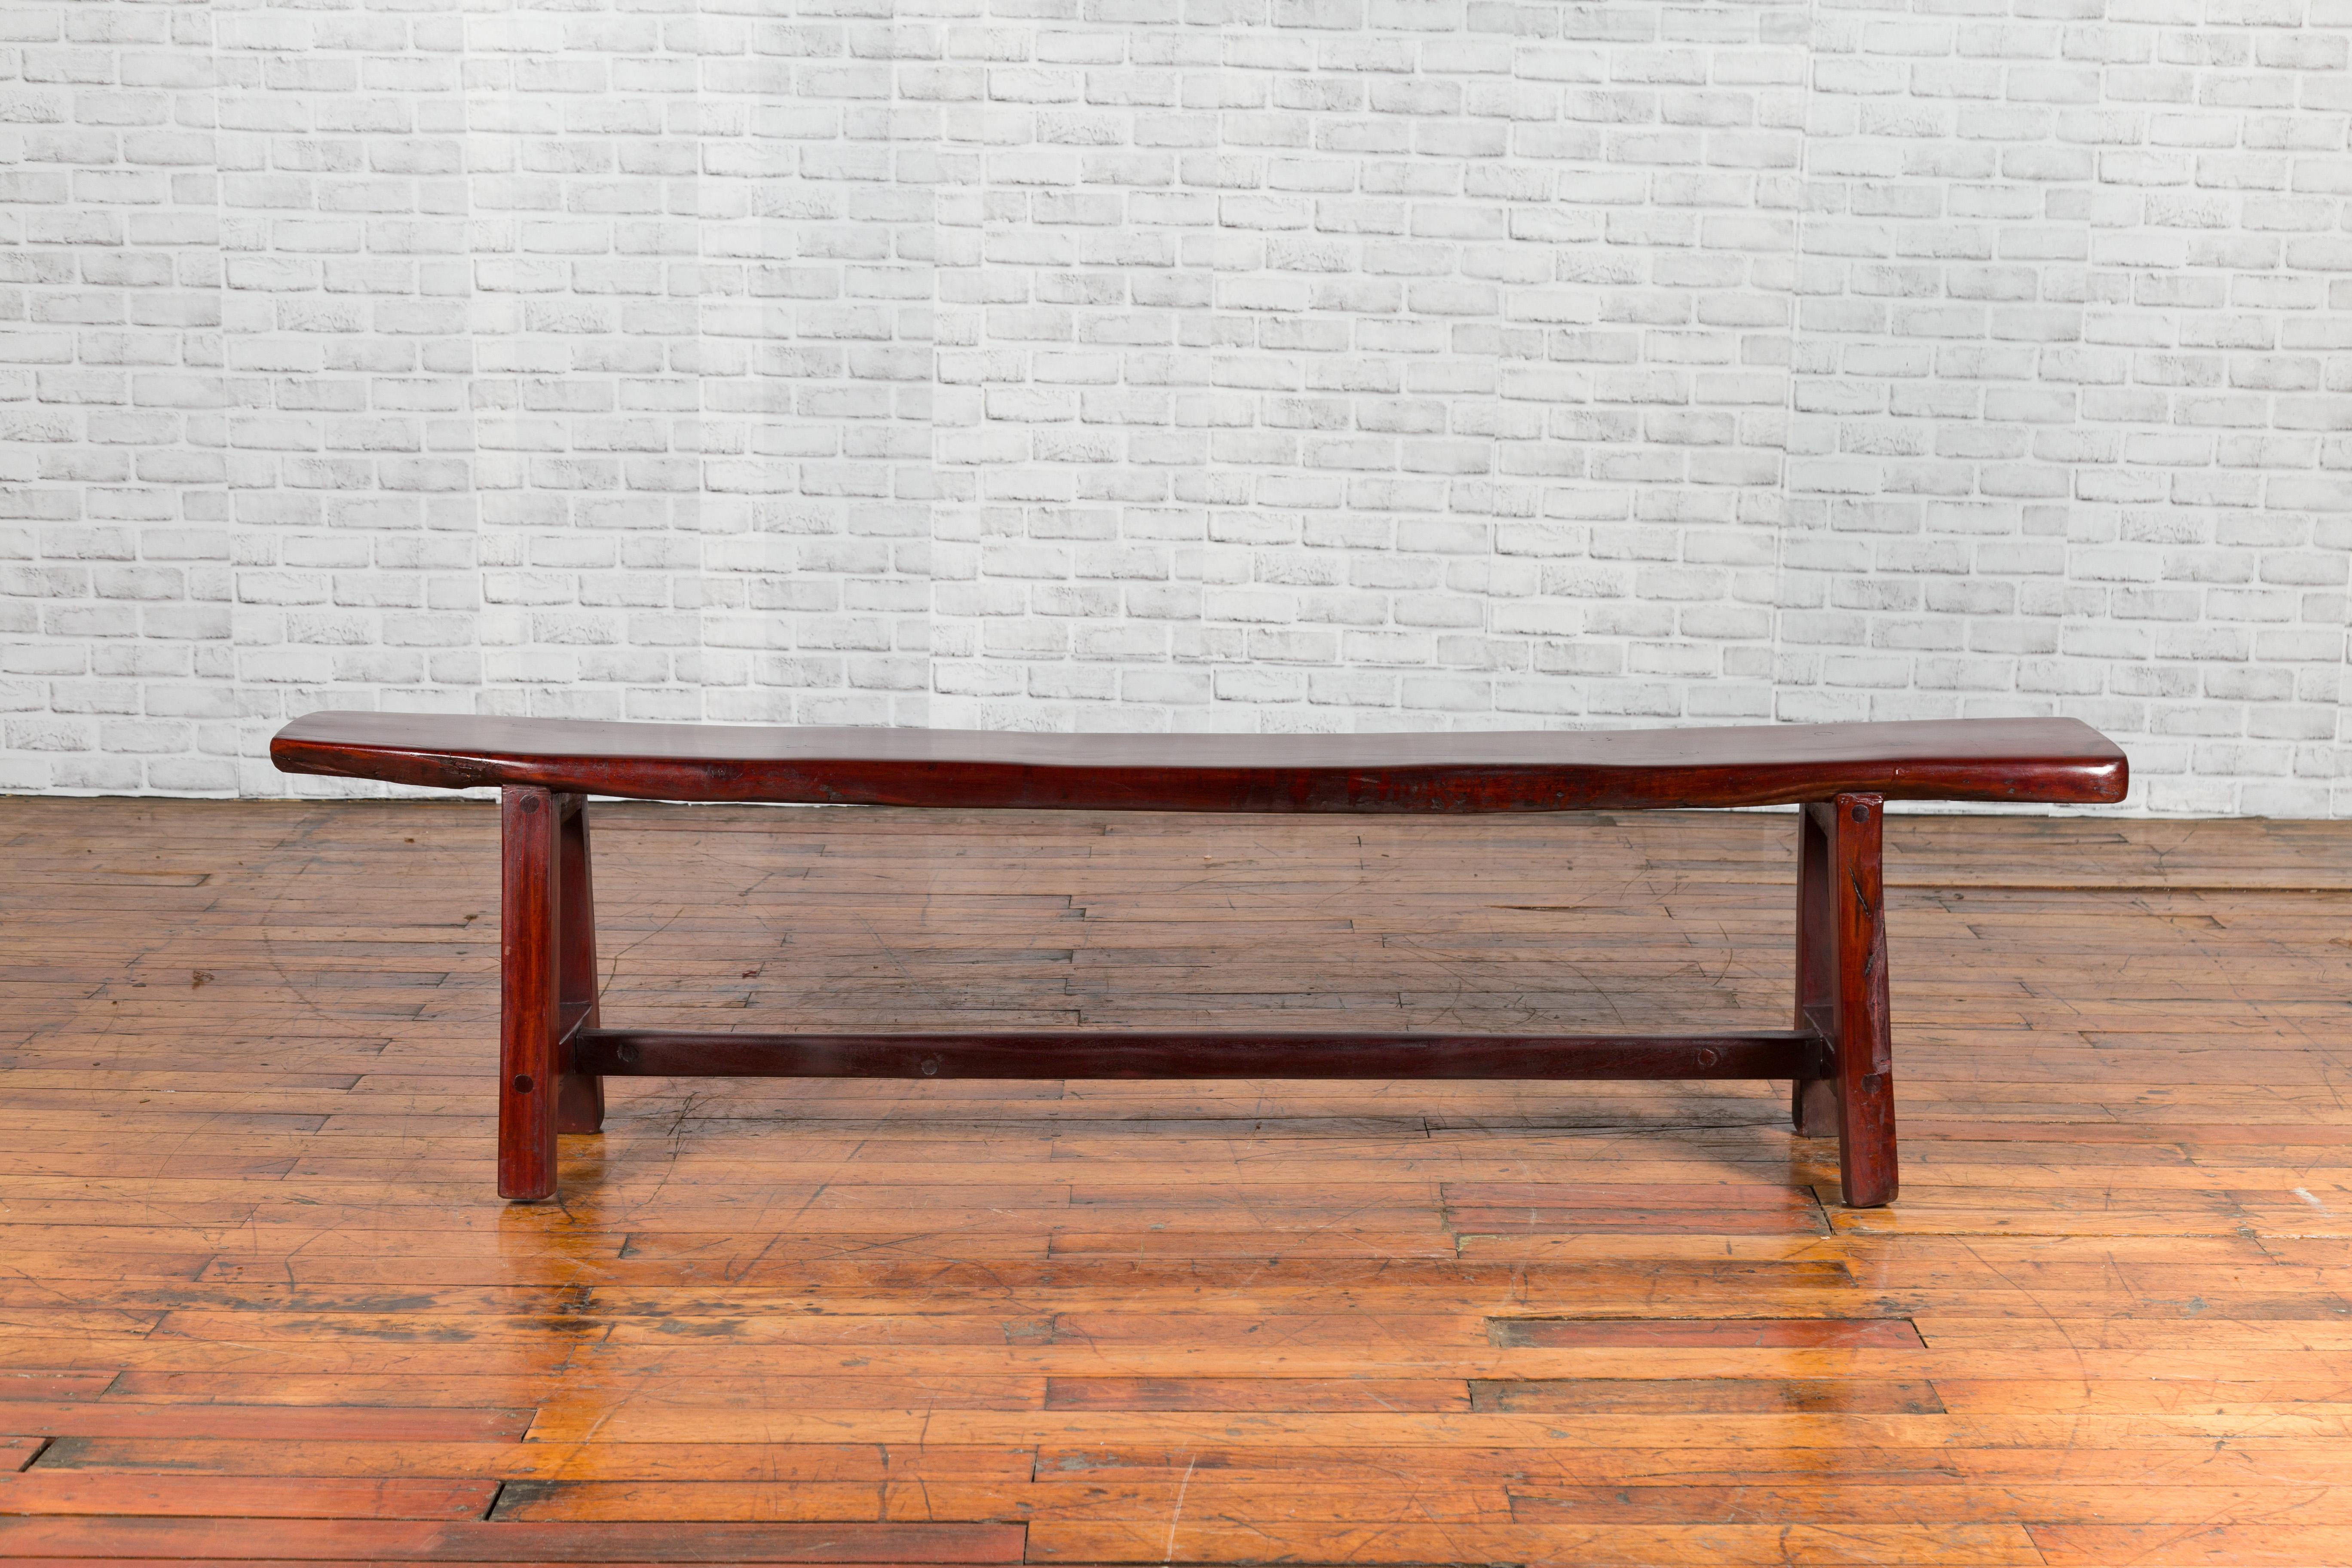 A vintage Javanese A-frame bench from the mid-20th century, with dark patina. Created in Indonesia during the midcentury period, this rustic bench features a long rectangular seat resting on an A-frame base with simple cross stretcher. Placed